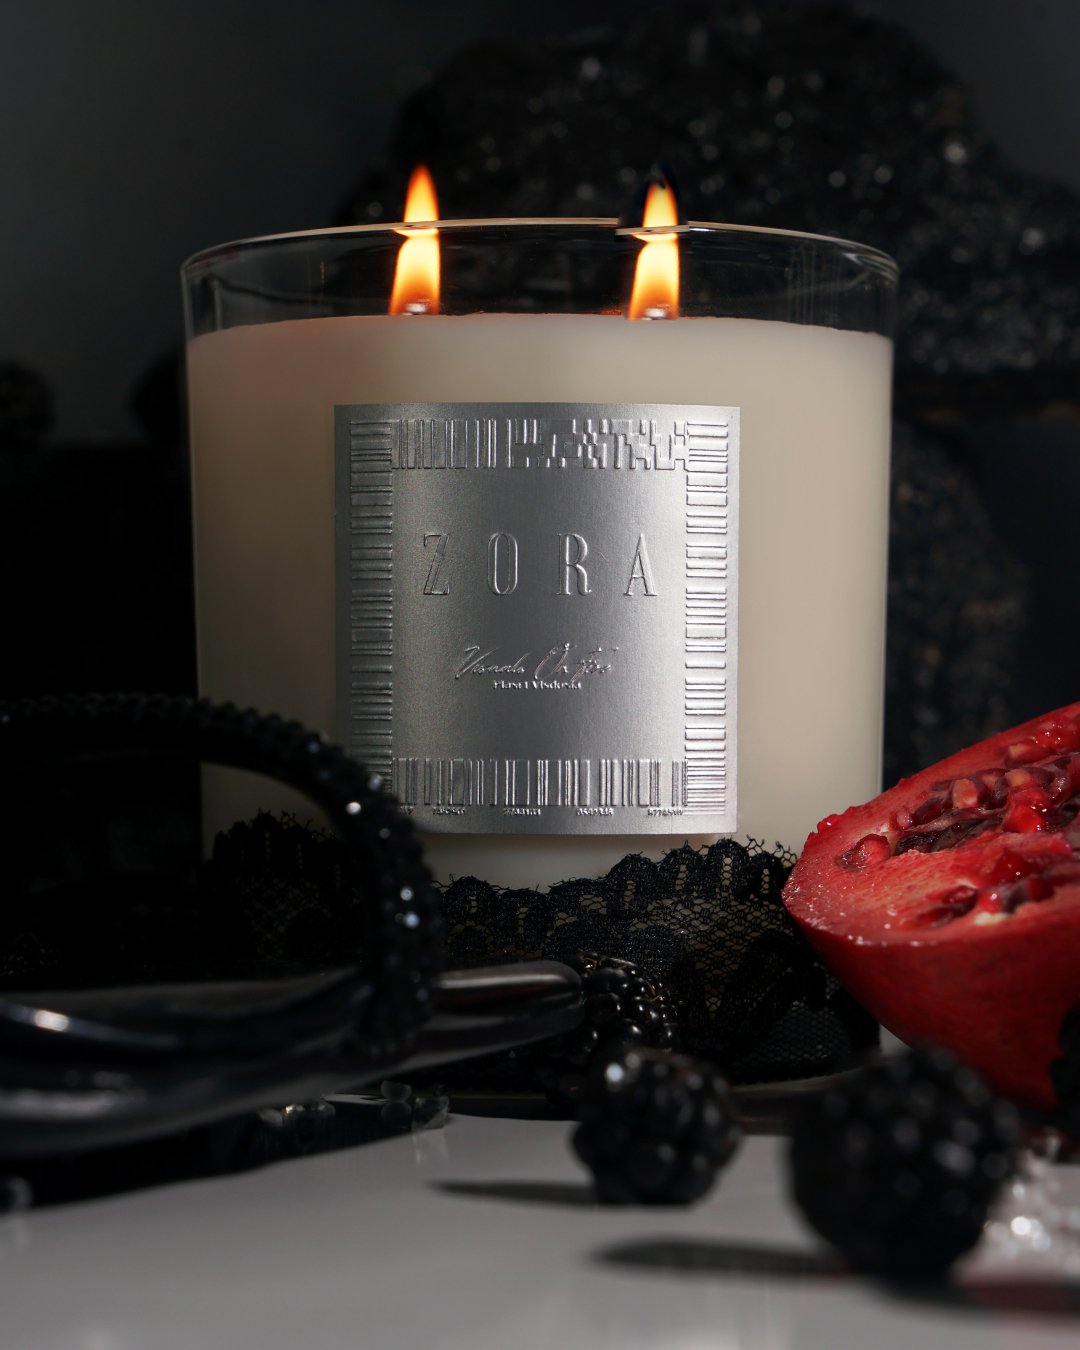 ZORA’s Expose Lingerie: Luxury Laced Scented Candle with Diamond Accents